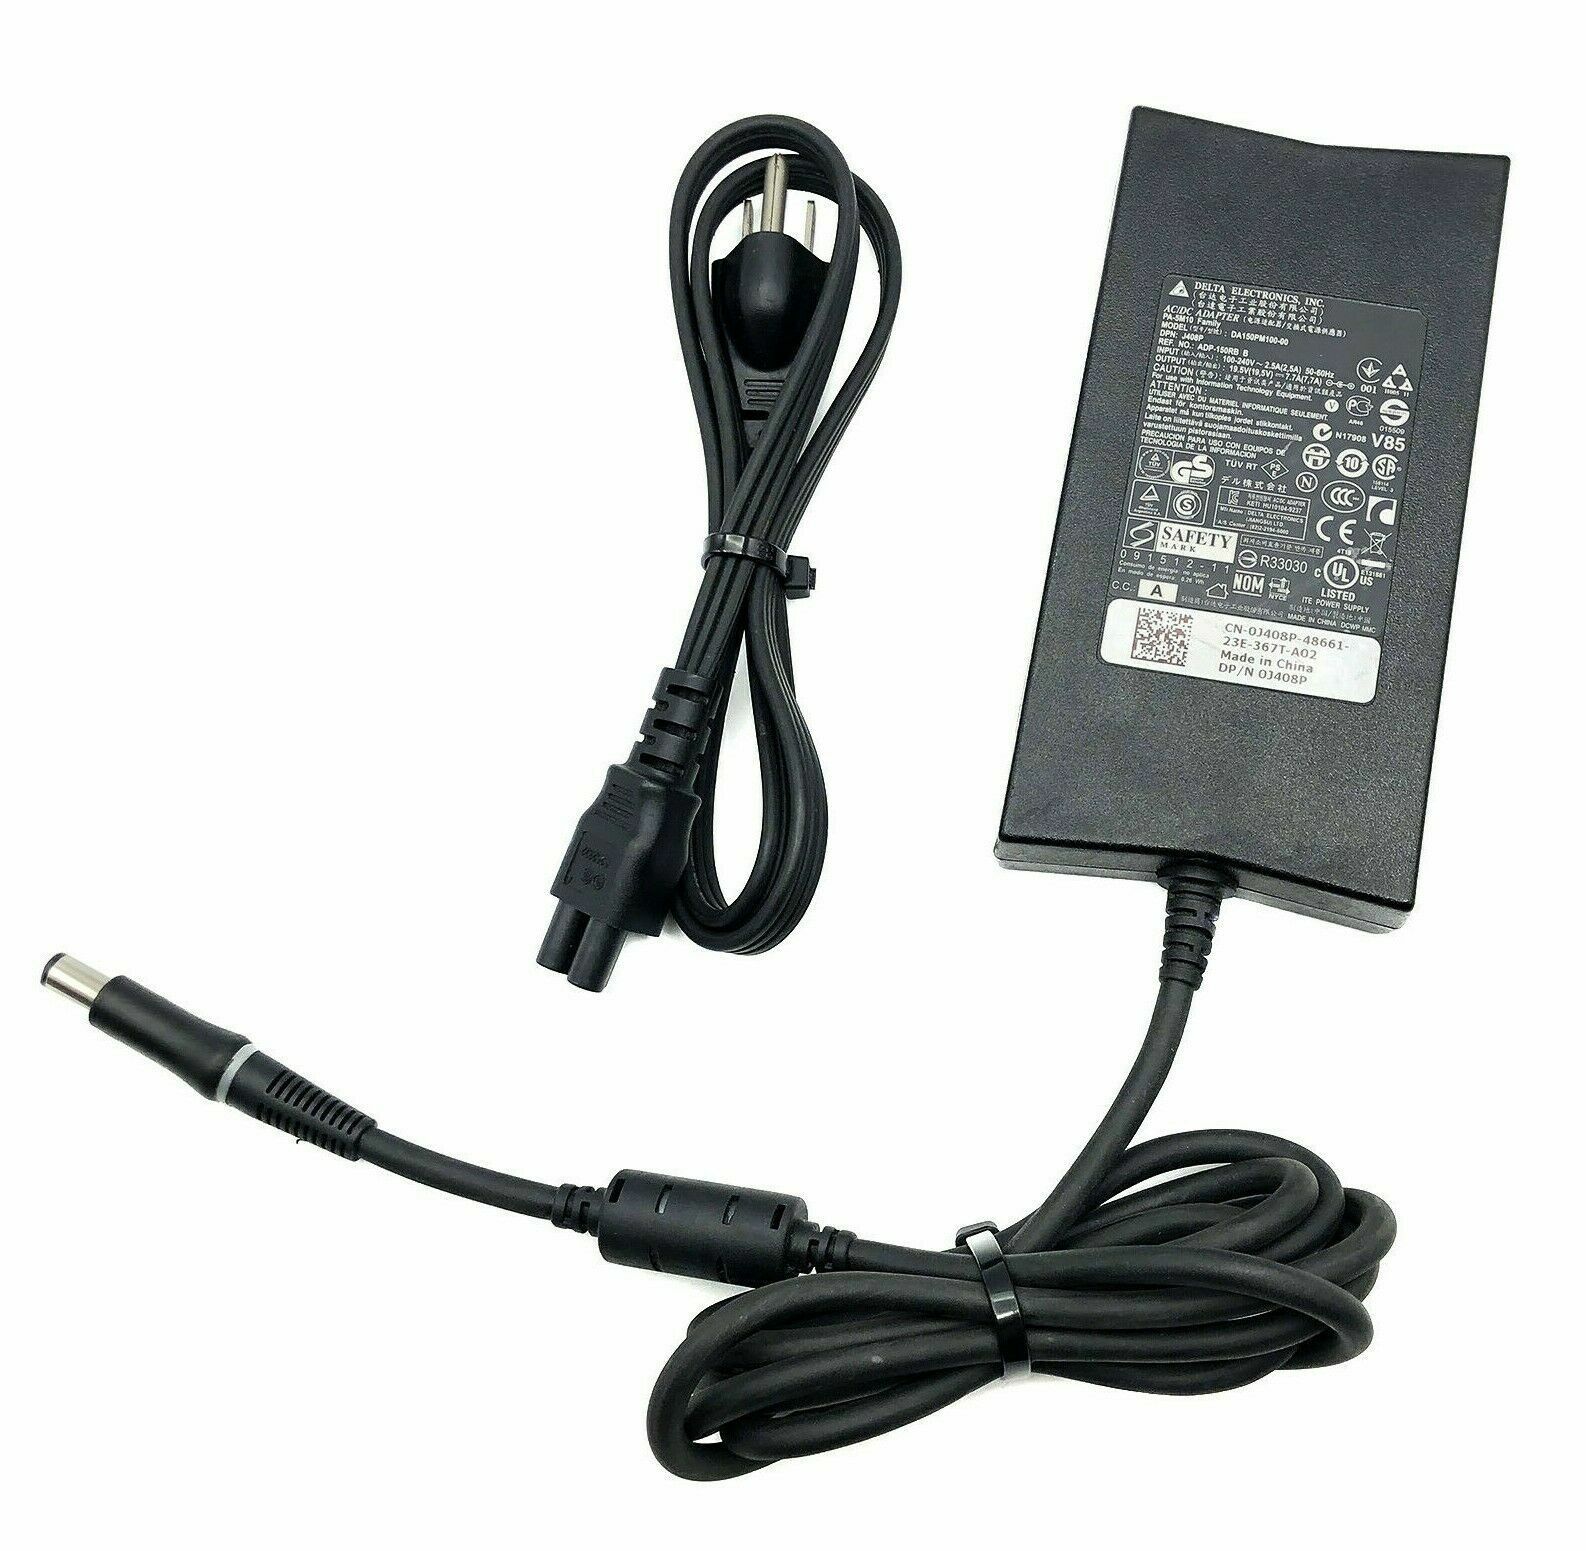 Original Delta AC Adapter For Dell Alienware M14x R1 R2 Laptop Charger 150W w/PC